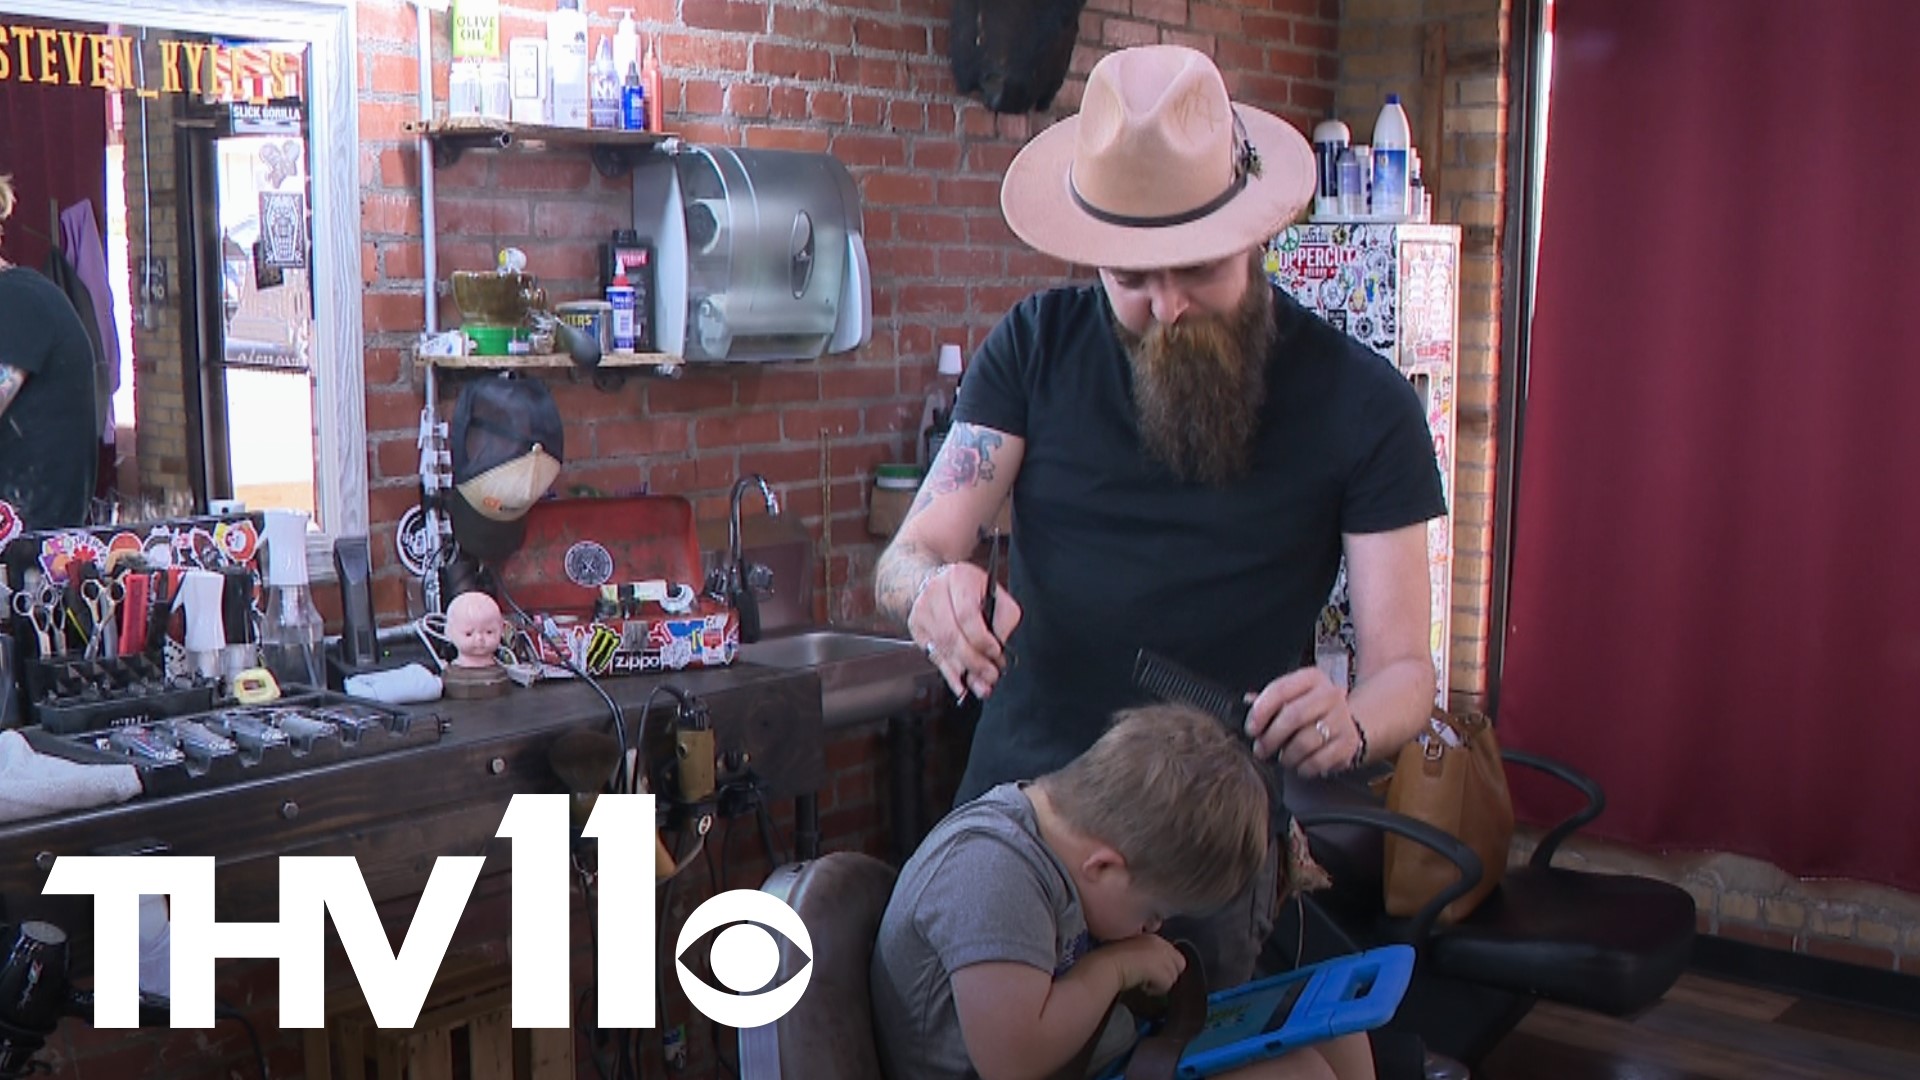 Taking kids to get a haircut can be challenging, especially if they have sensory issues. One family lucked out and found a barber that was a cut above the rest.